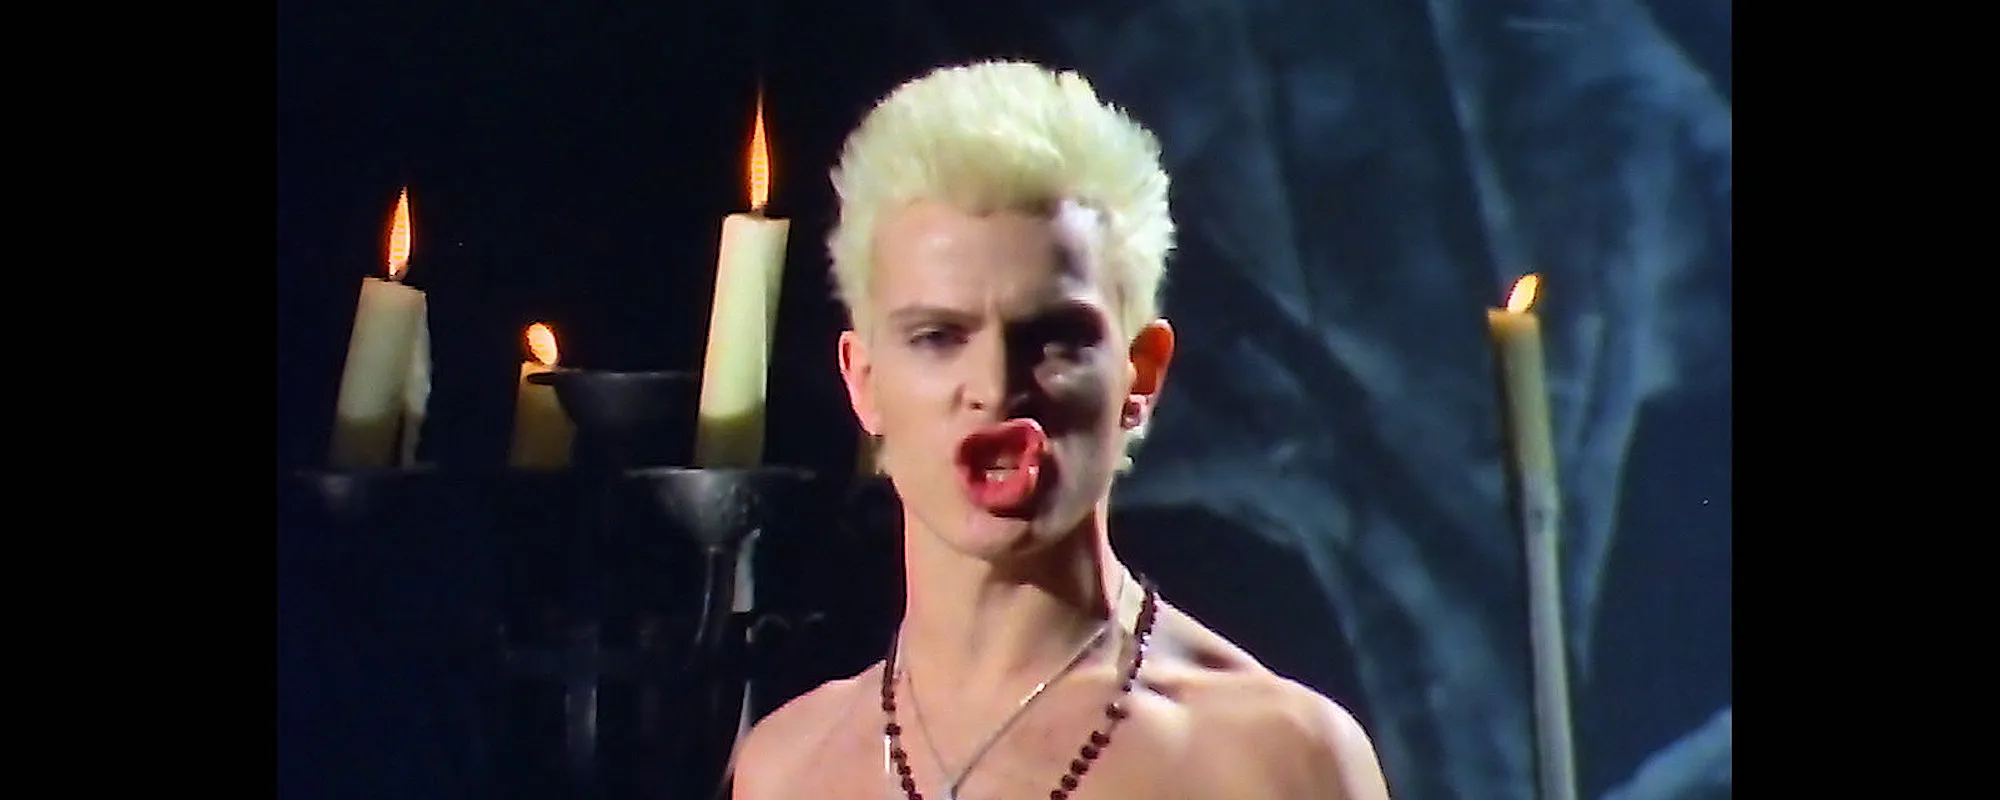 The Meaning of Billy Idol’s “White Wedding”